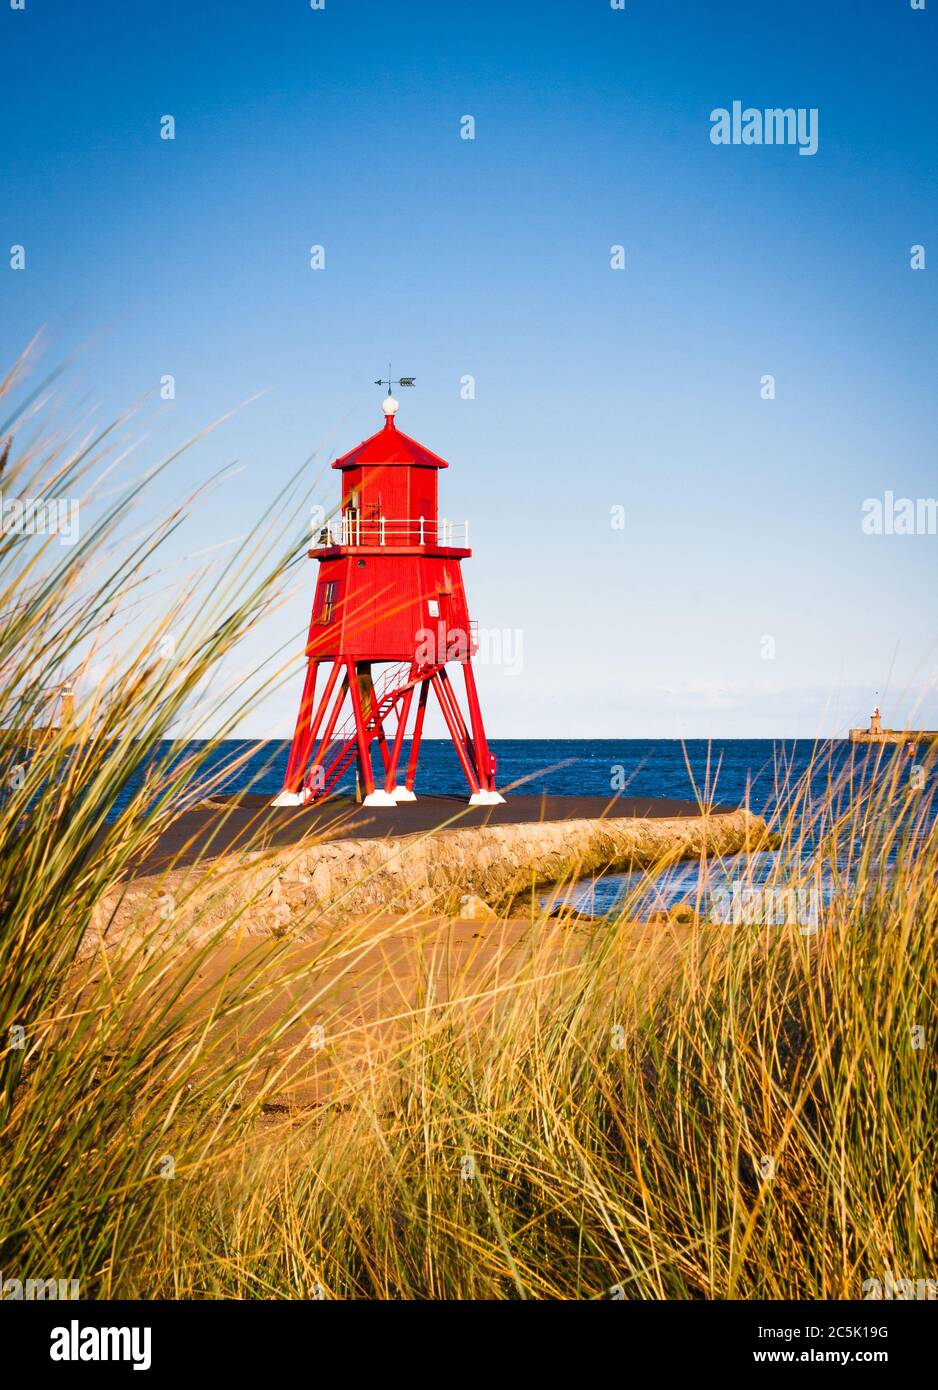 England, North East, Tyne&Wear, SouthShields, Little Haven, Pier. Lookin through the Marram grass and sand dunes towards the red lighthouse and pier i Stock Photo